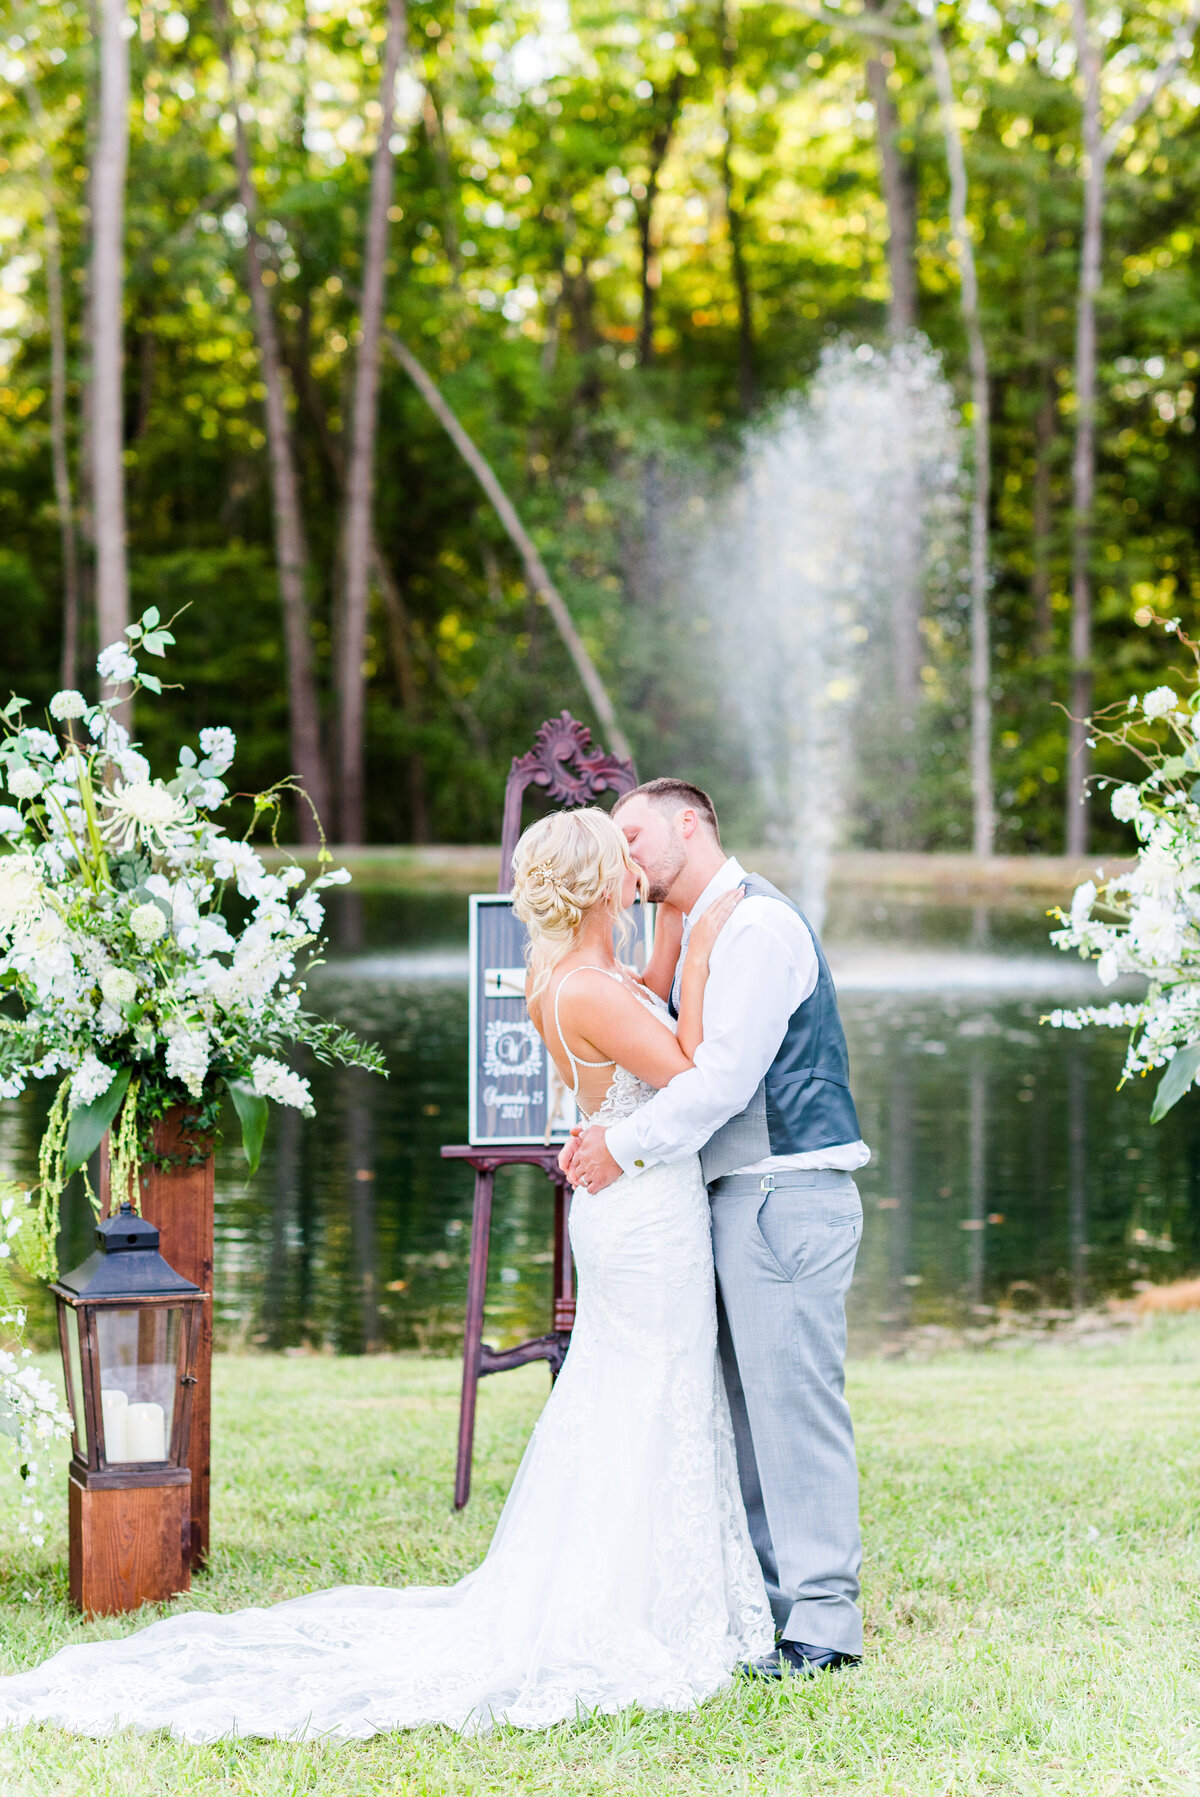 Courtney + Dylan's Wedding Day - Photography by Gerri Anna-599